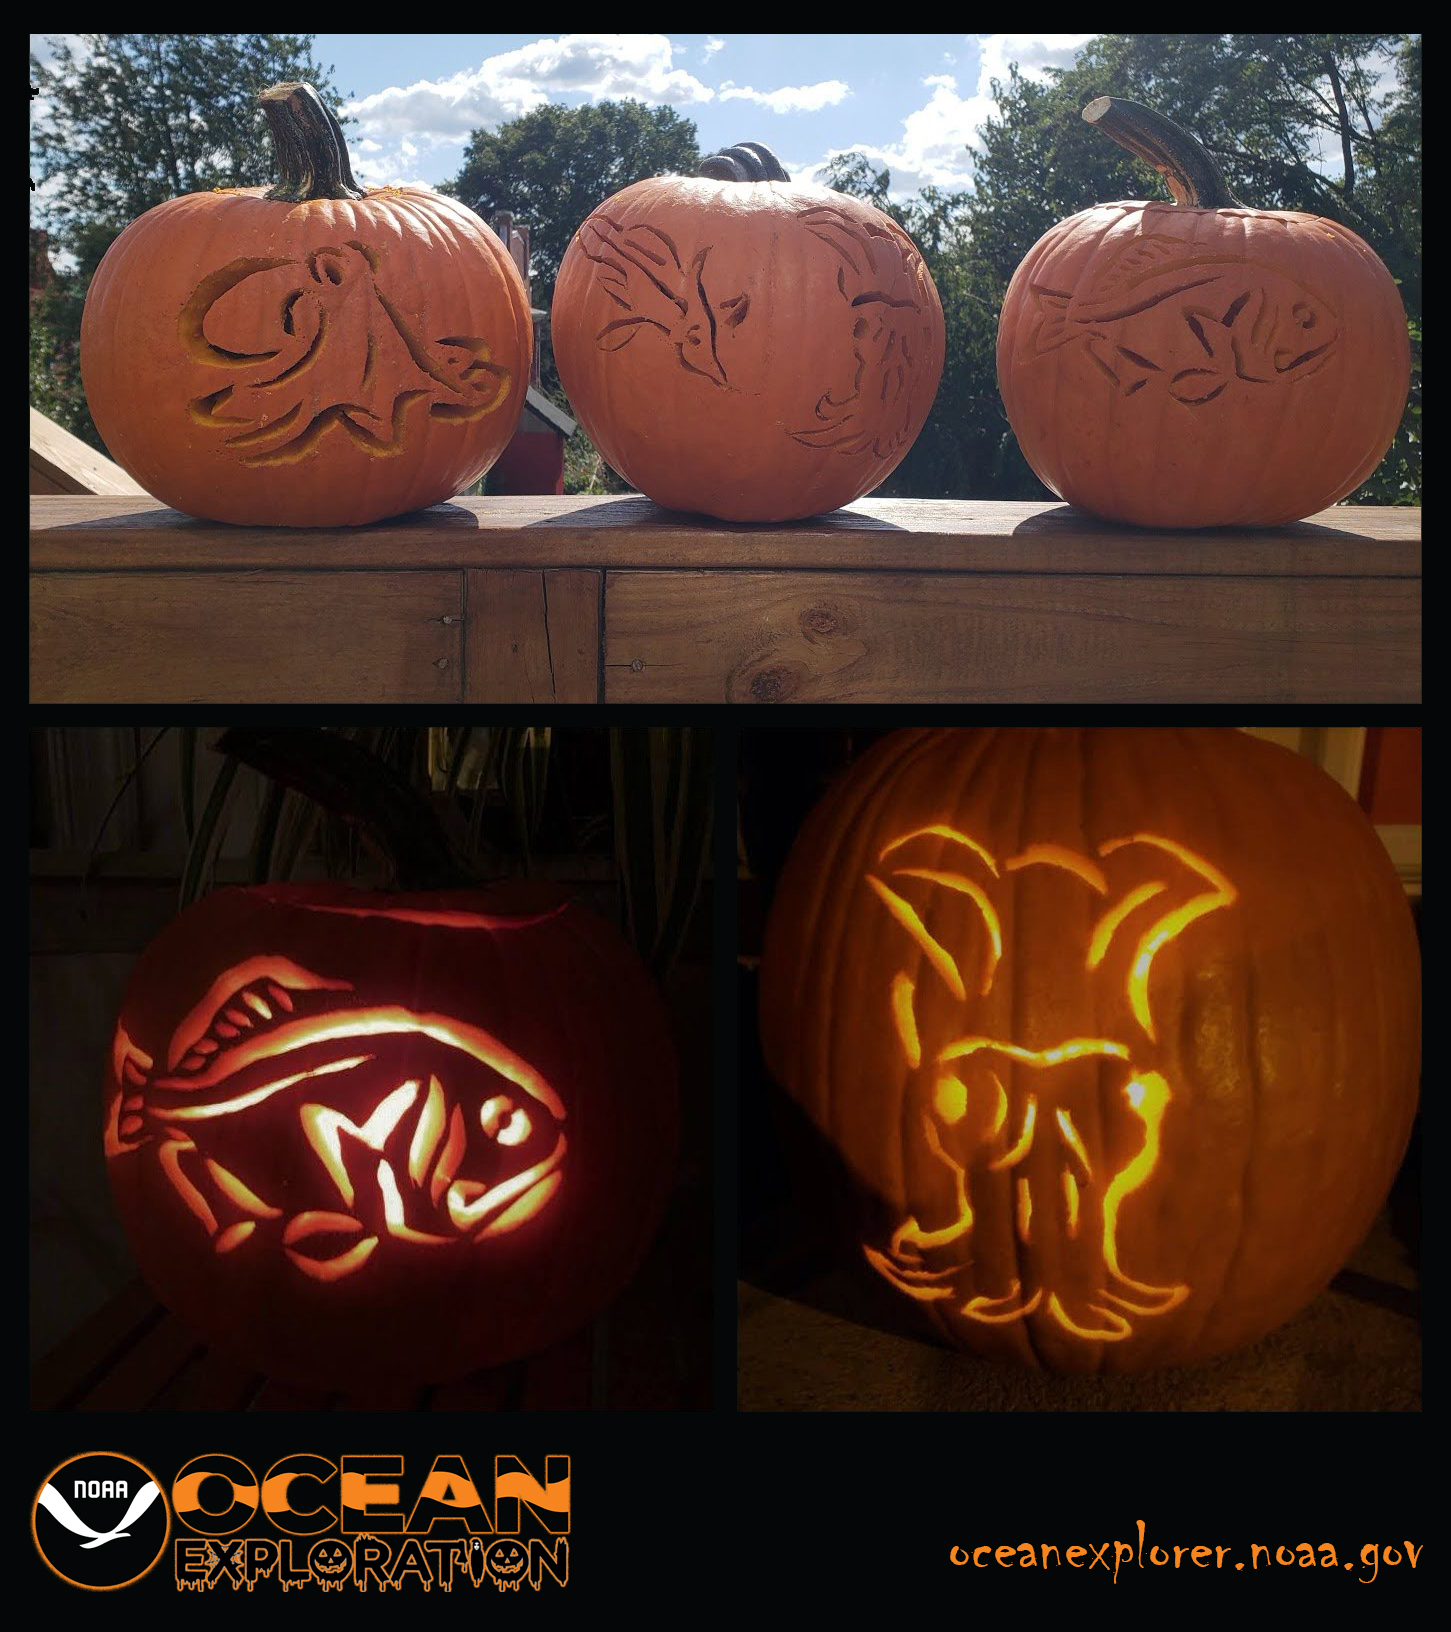 This Halloween, trick or treat yourself with some fun ocean-themed pumpkin carving templates! From a spooktacular sea star to a ghost shark, you’re sure to find something to carve that will have you thinking, "life is gourd."